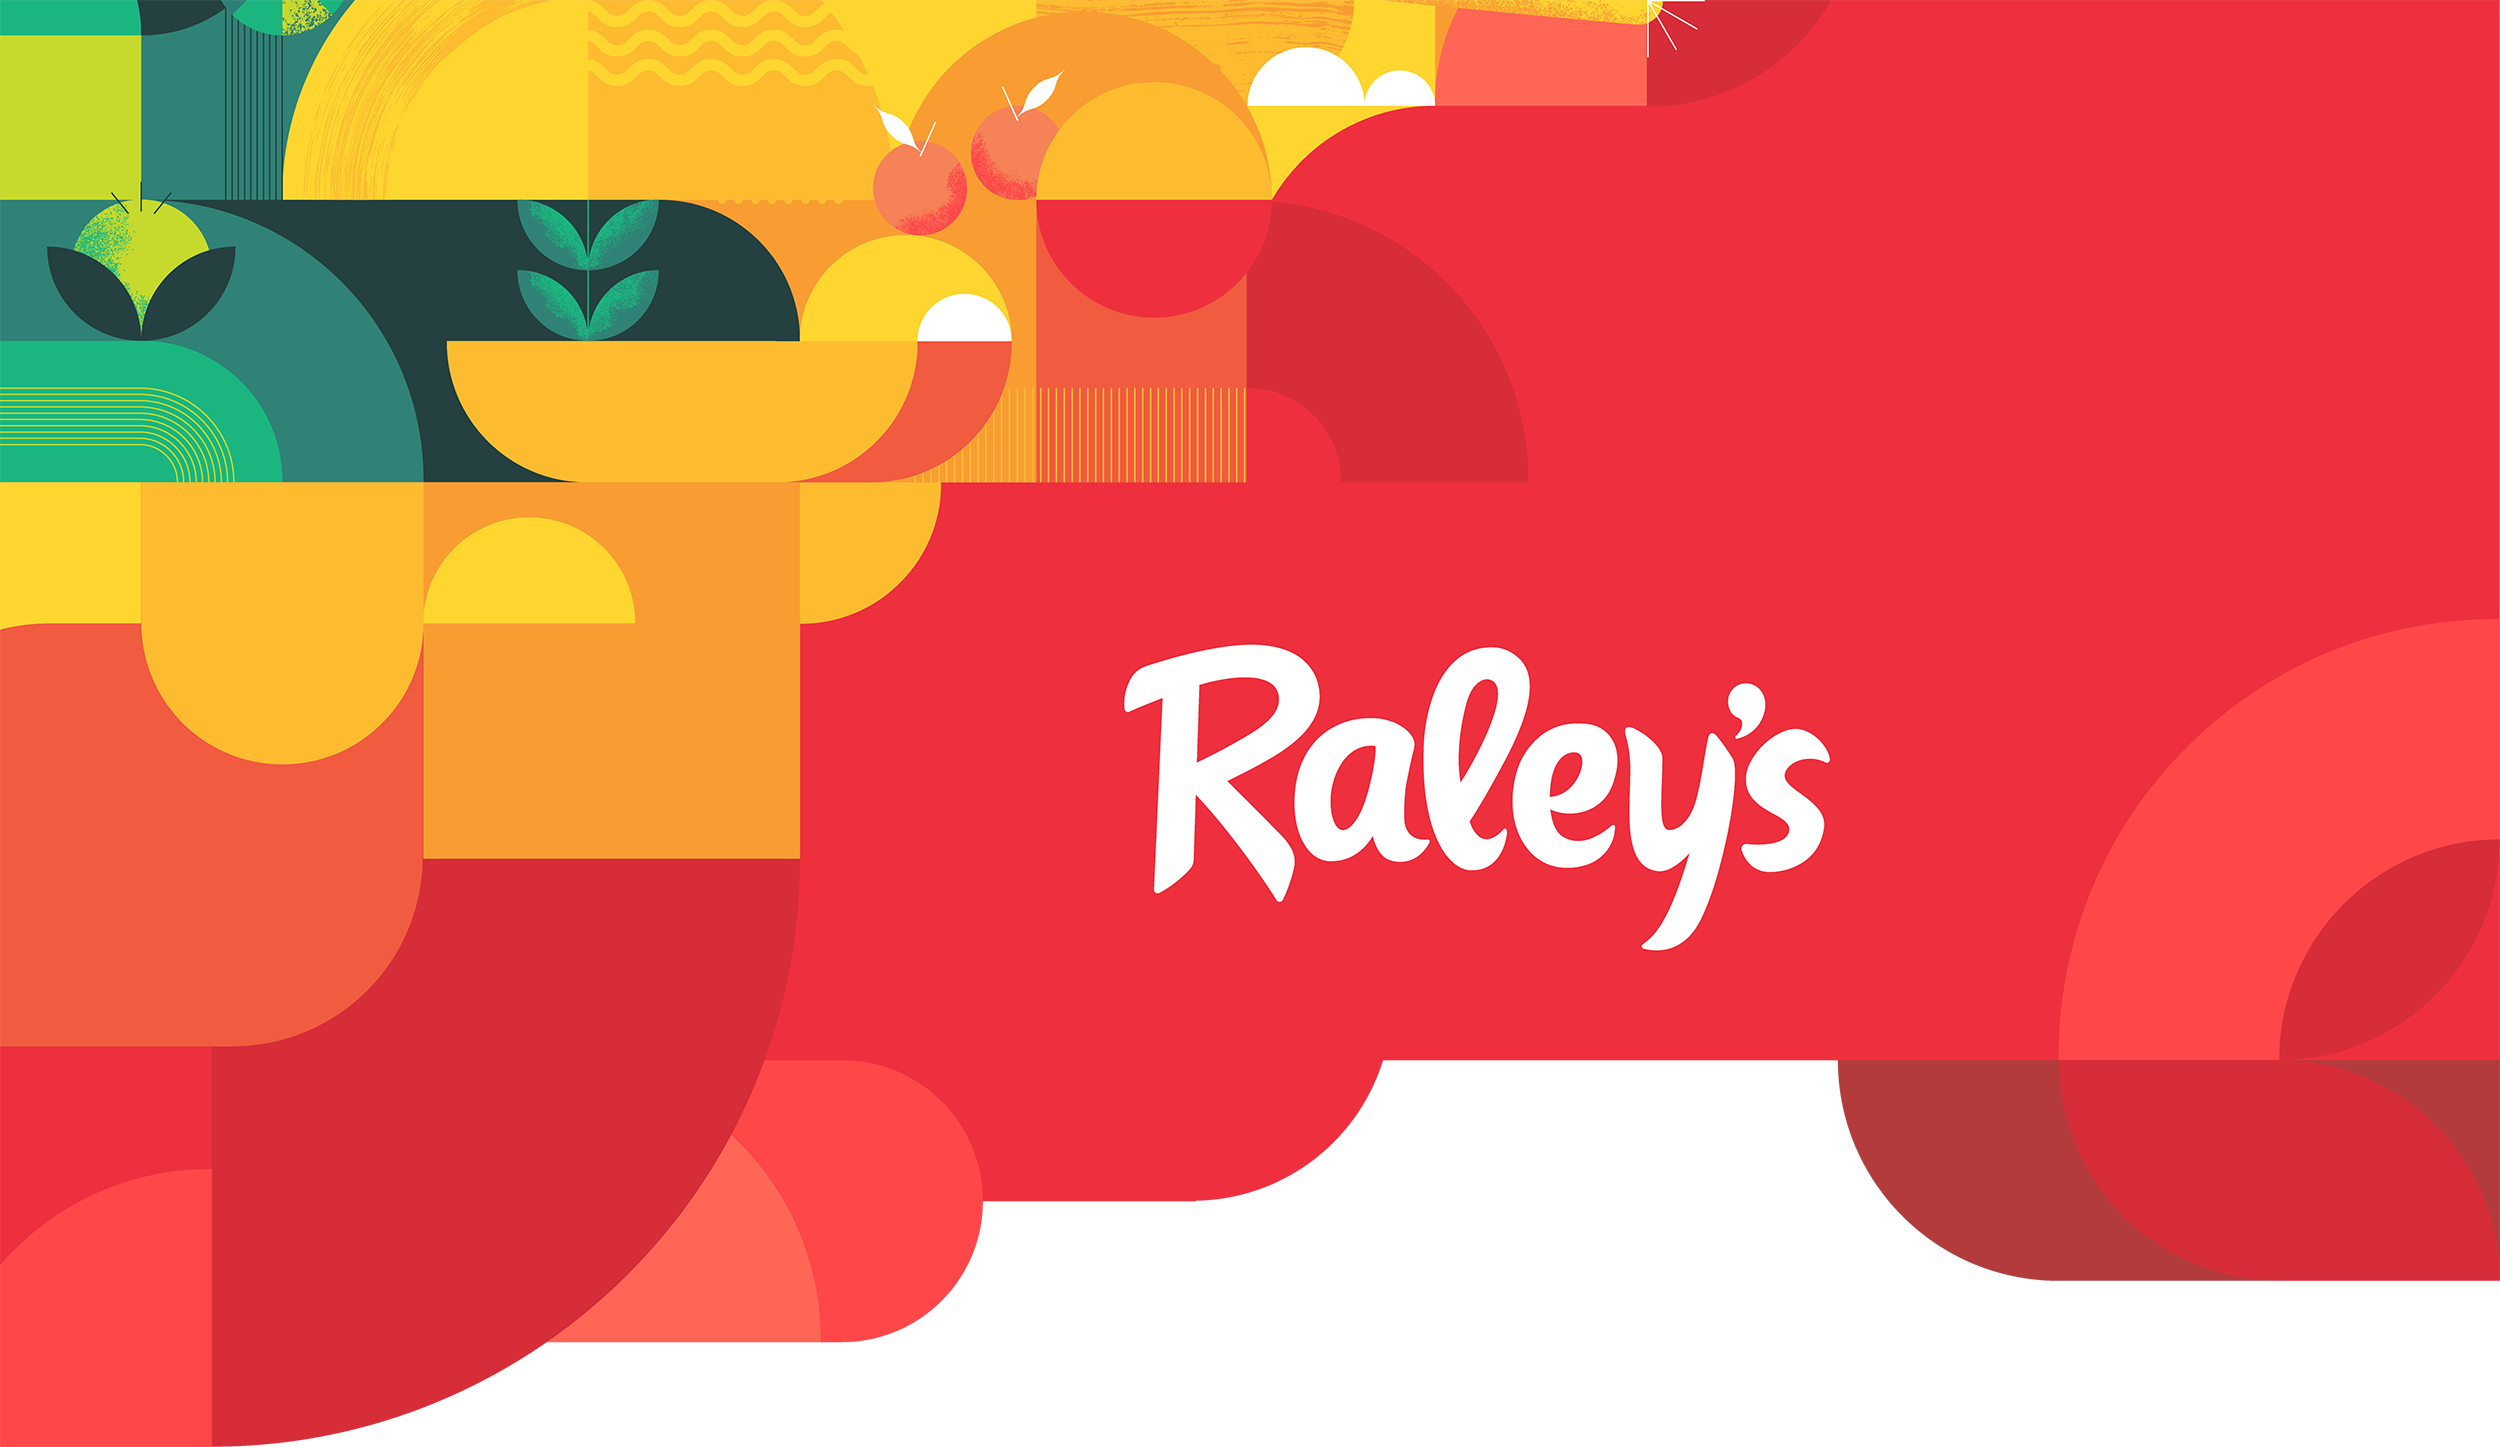 Raley's logo and illustrations